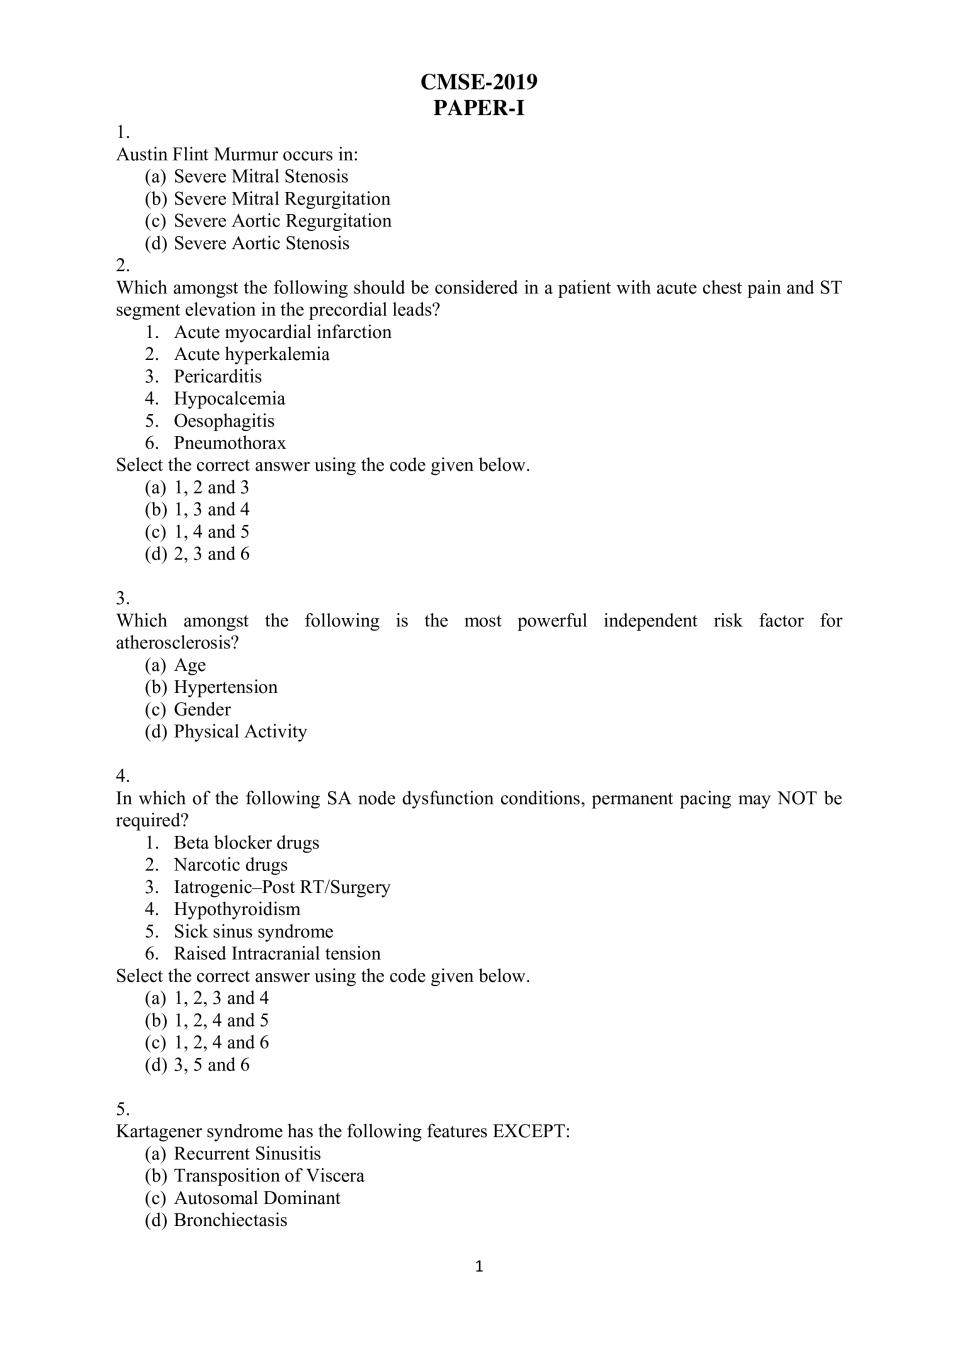 UPSC CMS 2019 Question Paper with Answers - Paper I - Page 1